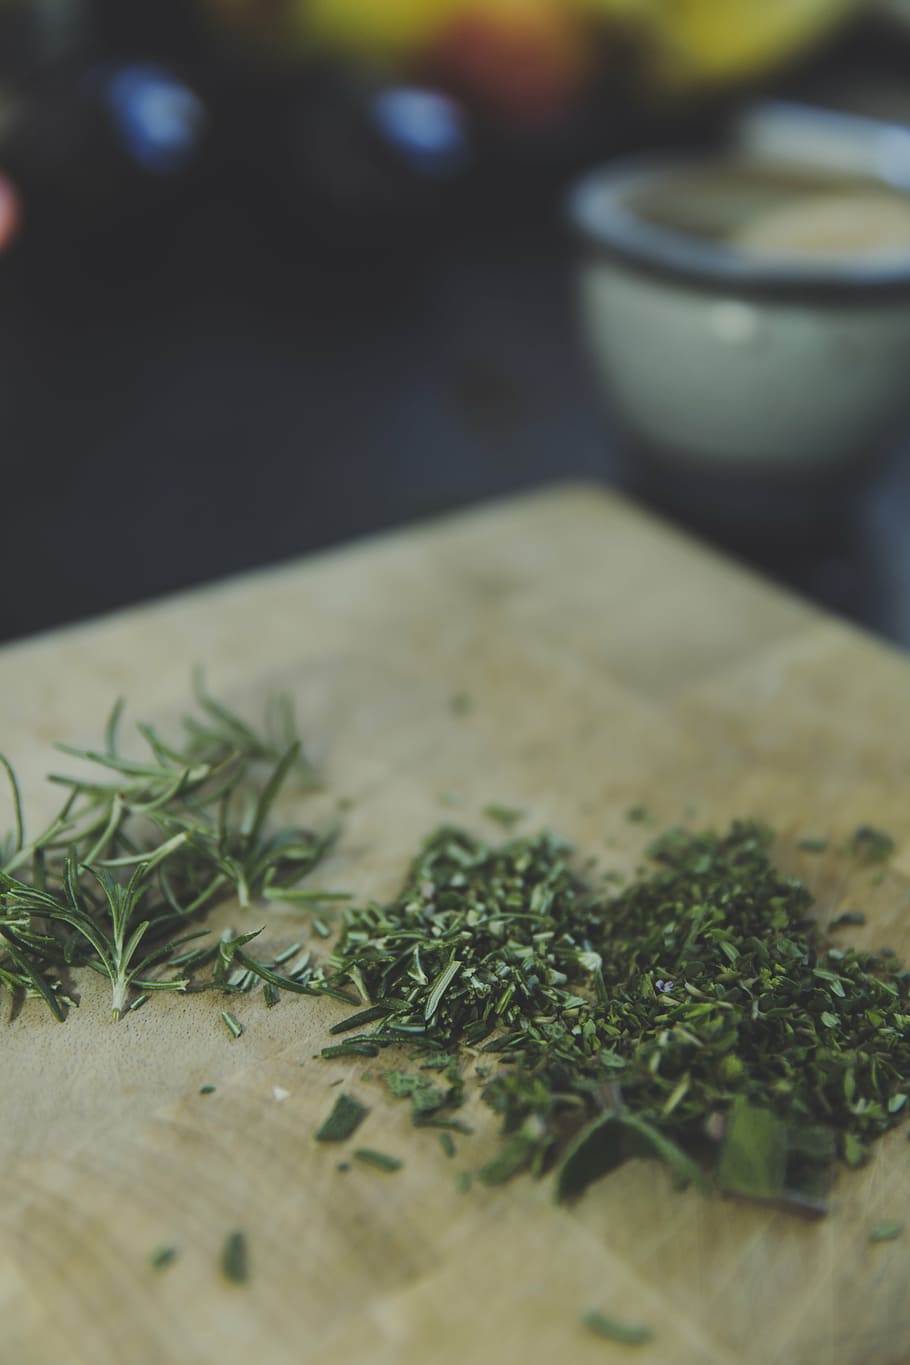 green, herbs, minced, table, herbal, plant, leaves, nature, blur, food and drink